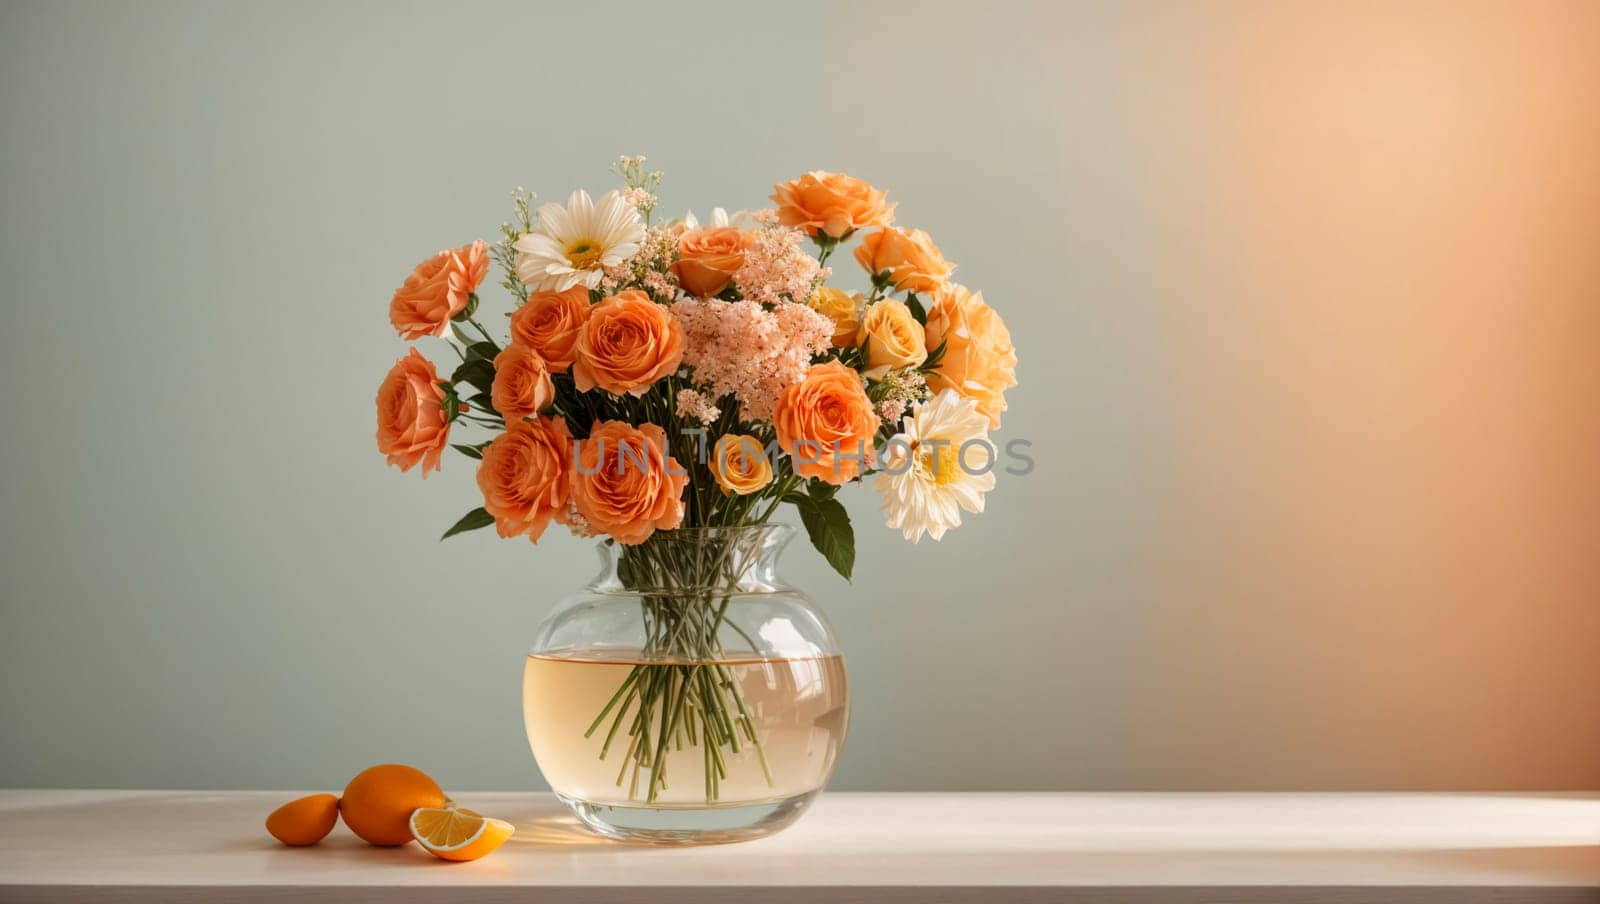 There is a vase of flowers by the light orange wall by Севостьянов